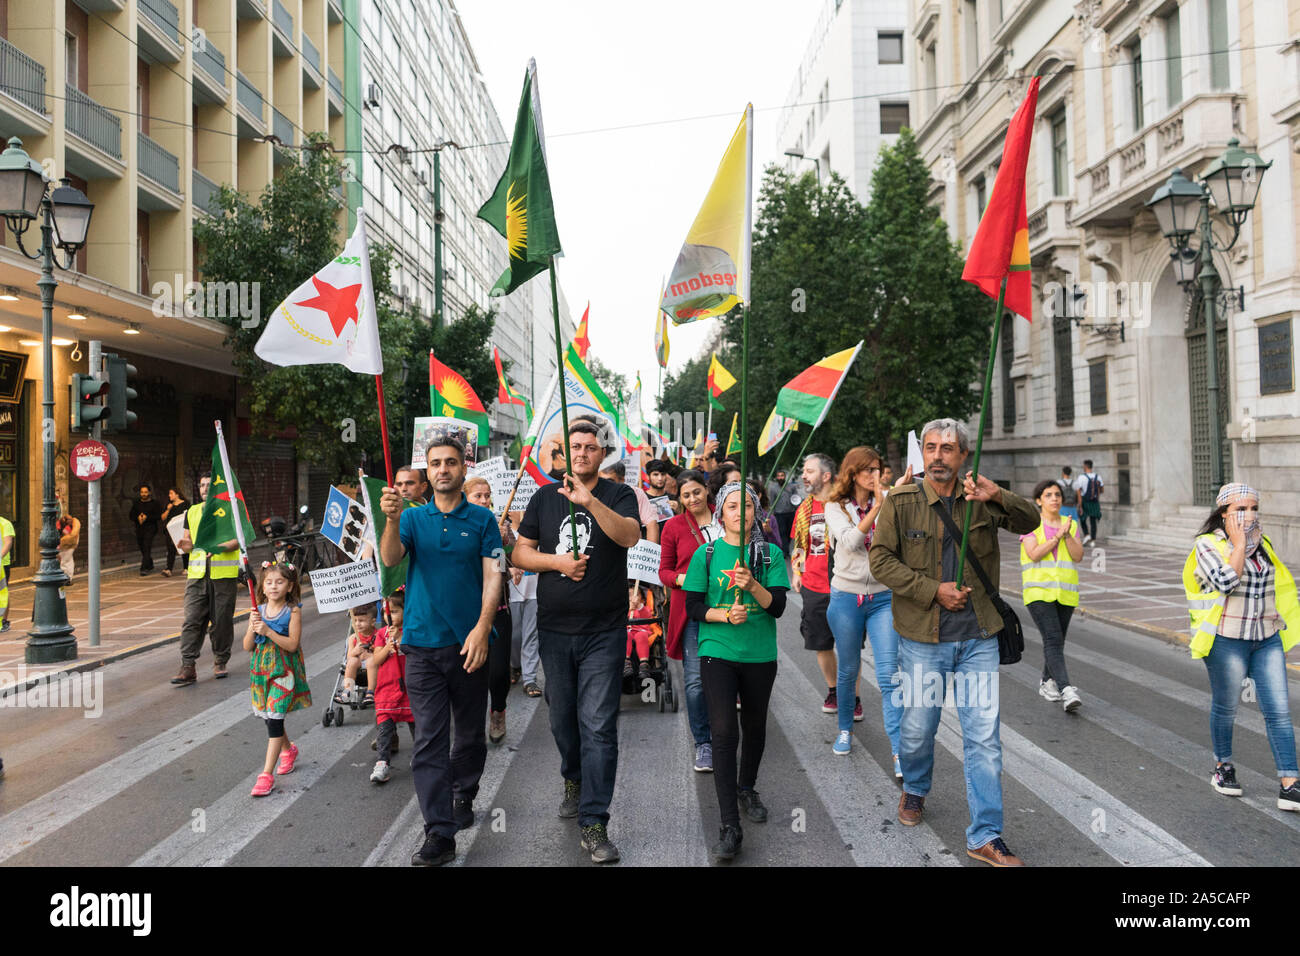 Protesters hold flags of Kurdistan during the demonstration.Protest to the Turkish Embassy, against the Turkish military invasion in North and East Syria, Rojava area, by Kurds and solidarity groups in Athens, Greece. Stock Photo